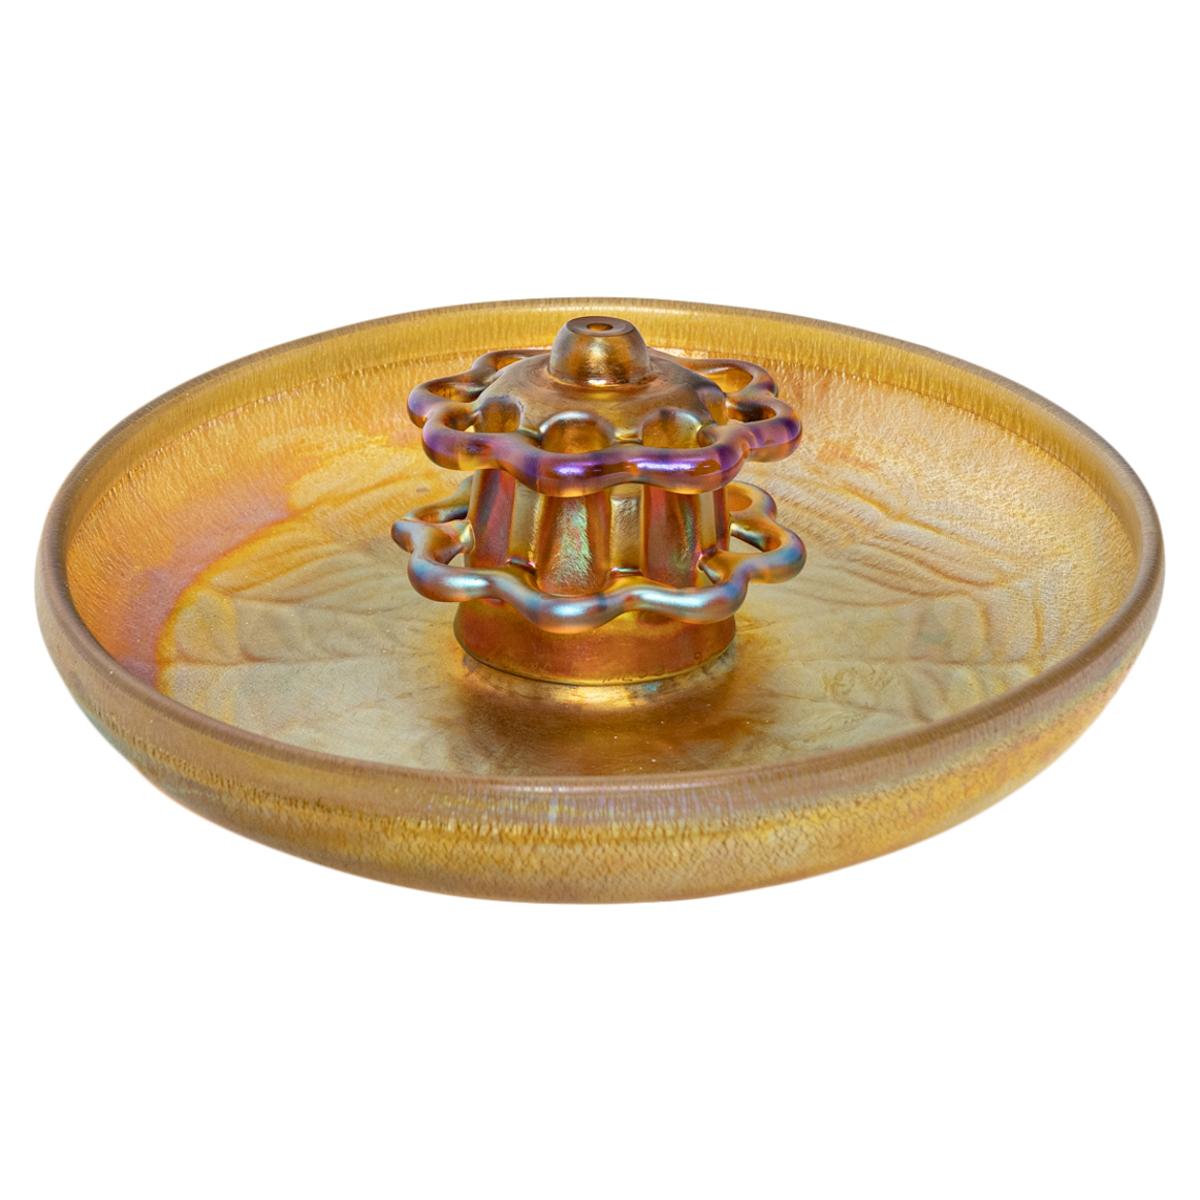 Antique Art Nouveau L.C. Tiffany Furnaces Favrille iridescent gold glass flower frog & bowl, 1920.
The bowl and flower frog are handblown in a gold iridescent glass, the two tier flower frog fits onto the shallow bowl that has a 'spider's web'